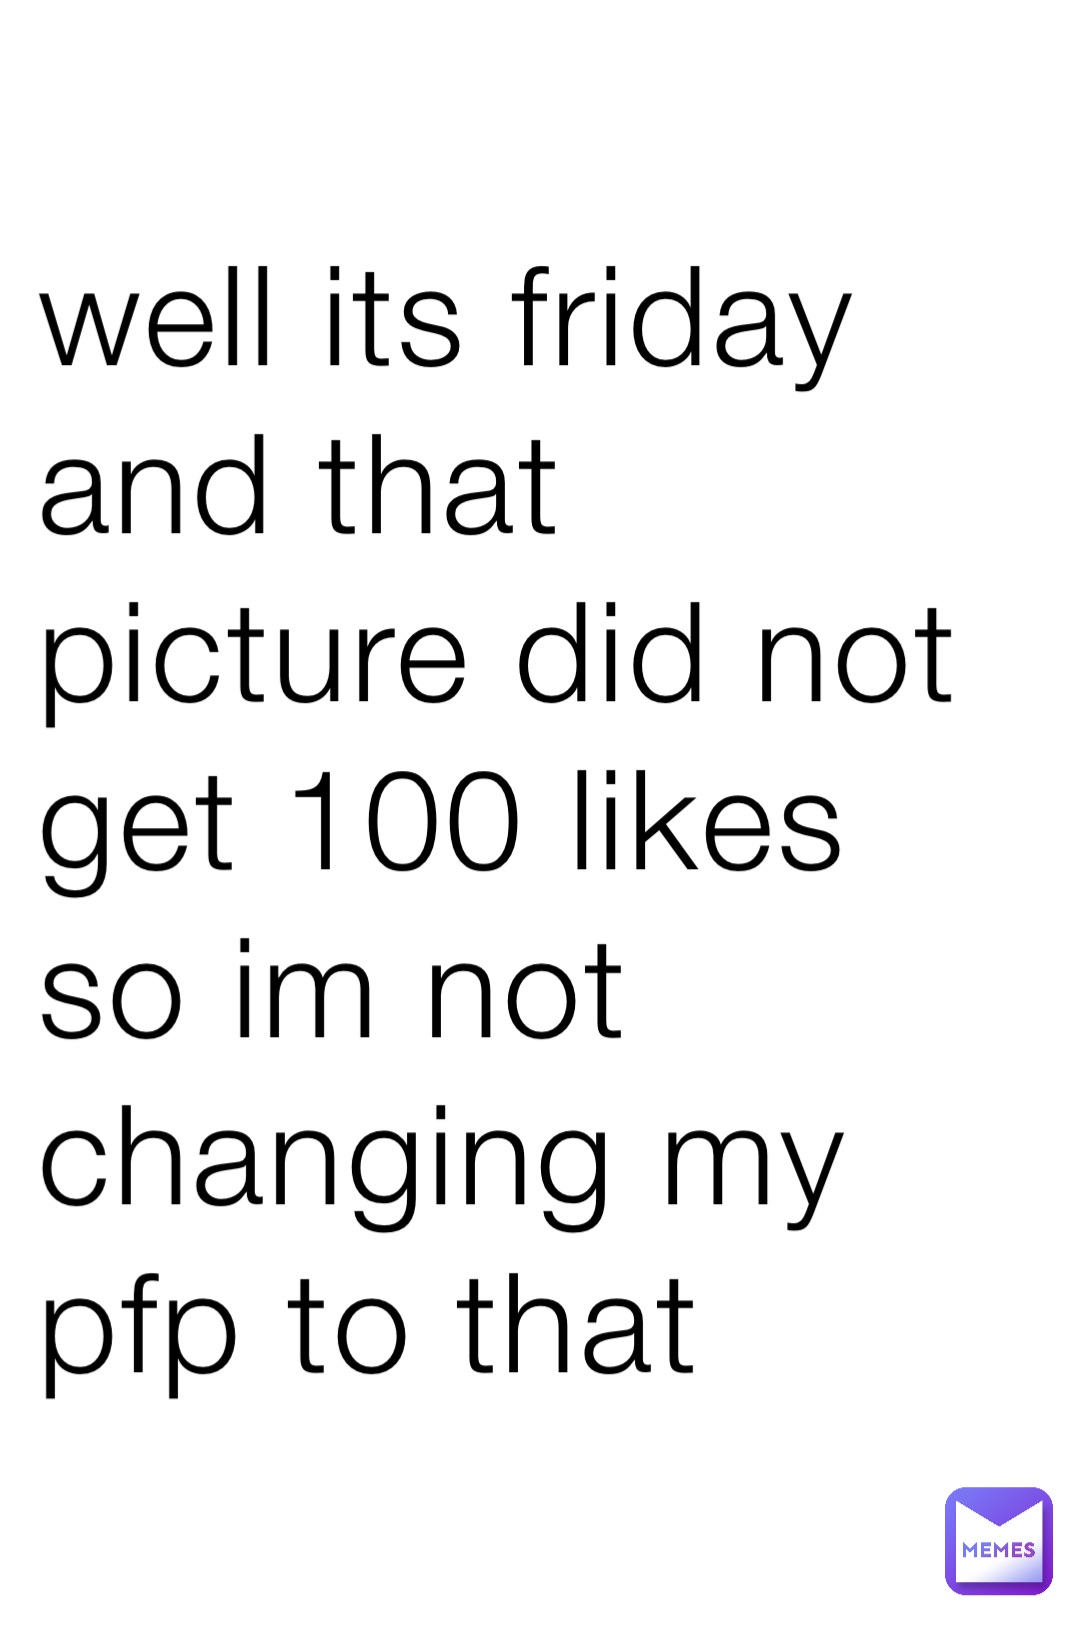 well its friday and that picture did not get 100 likes so im not changing my pfp to that